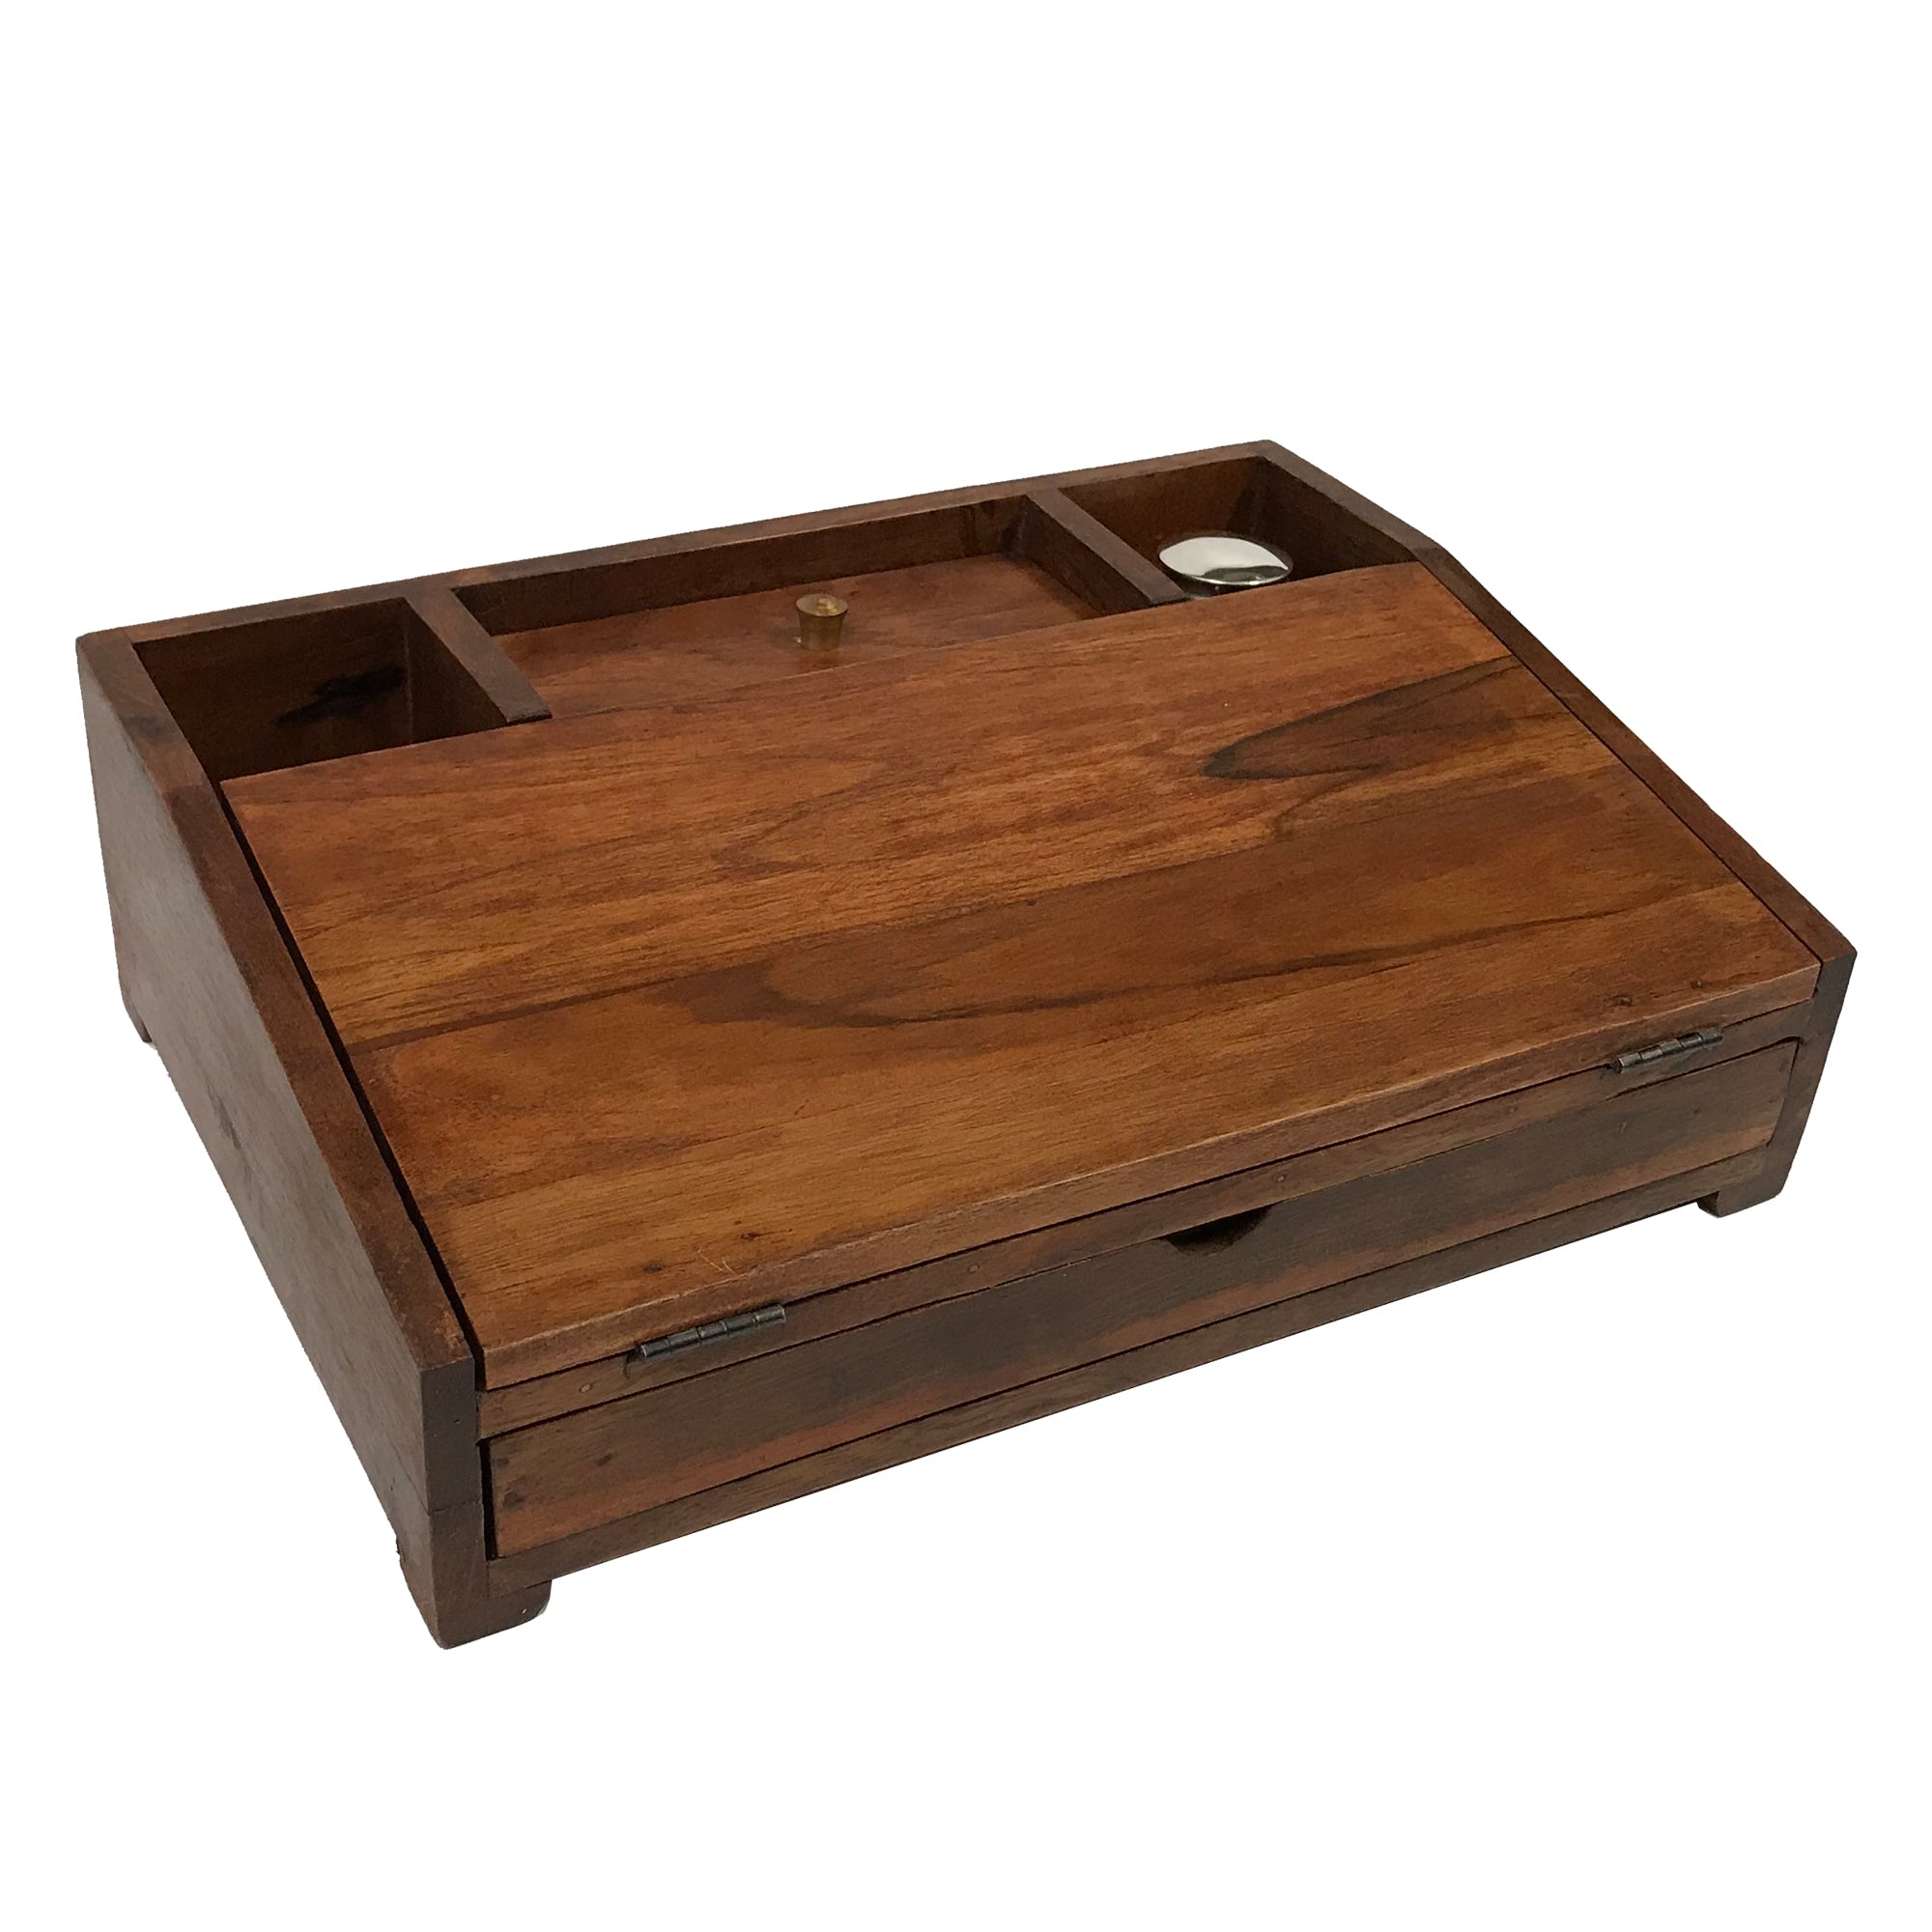 Portable Distressed Wooden Writing Desk Set